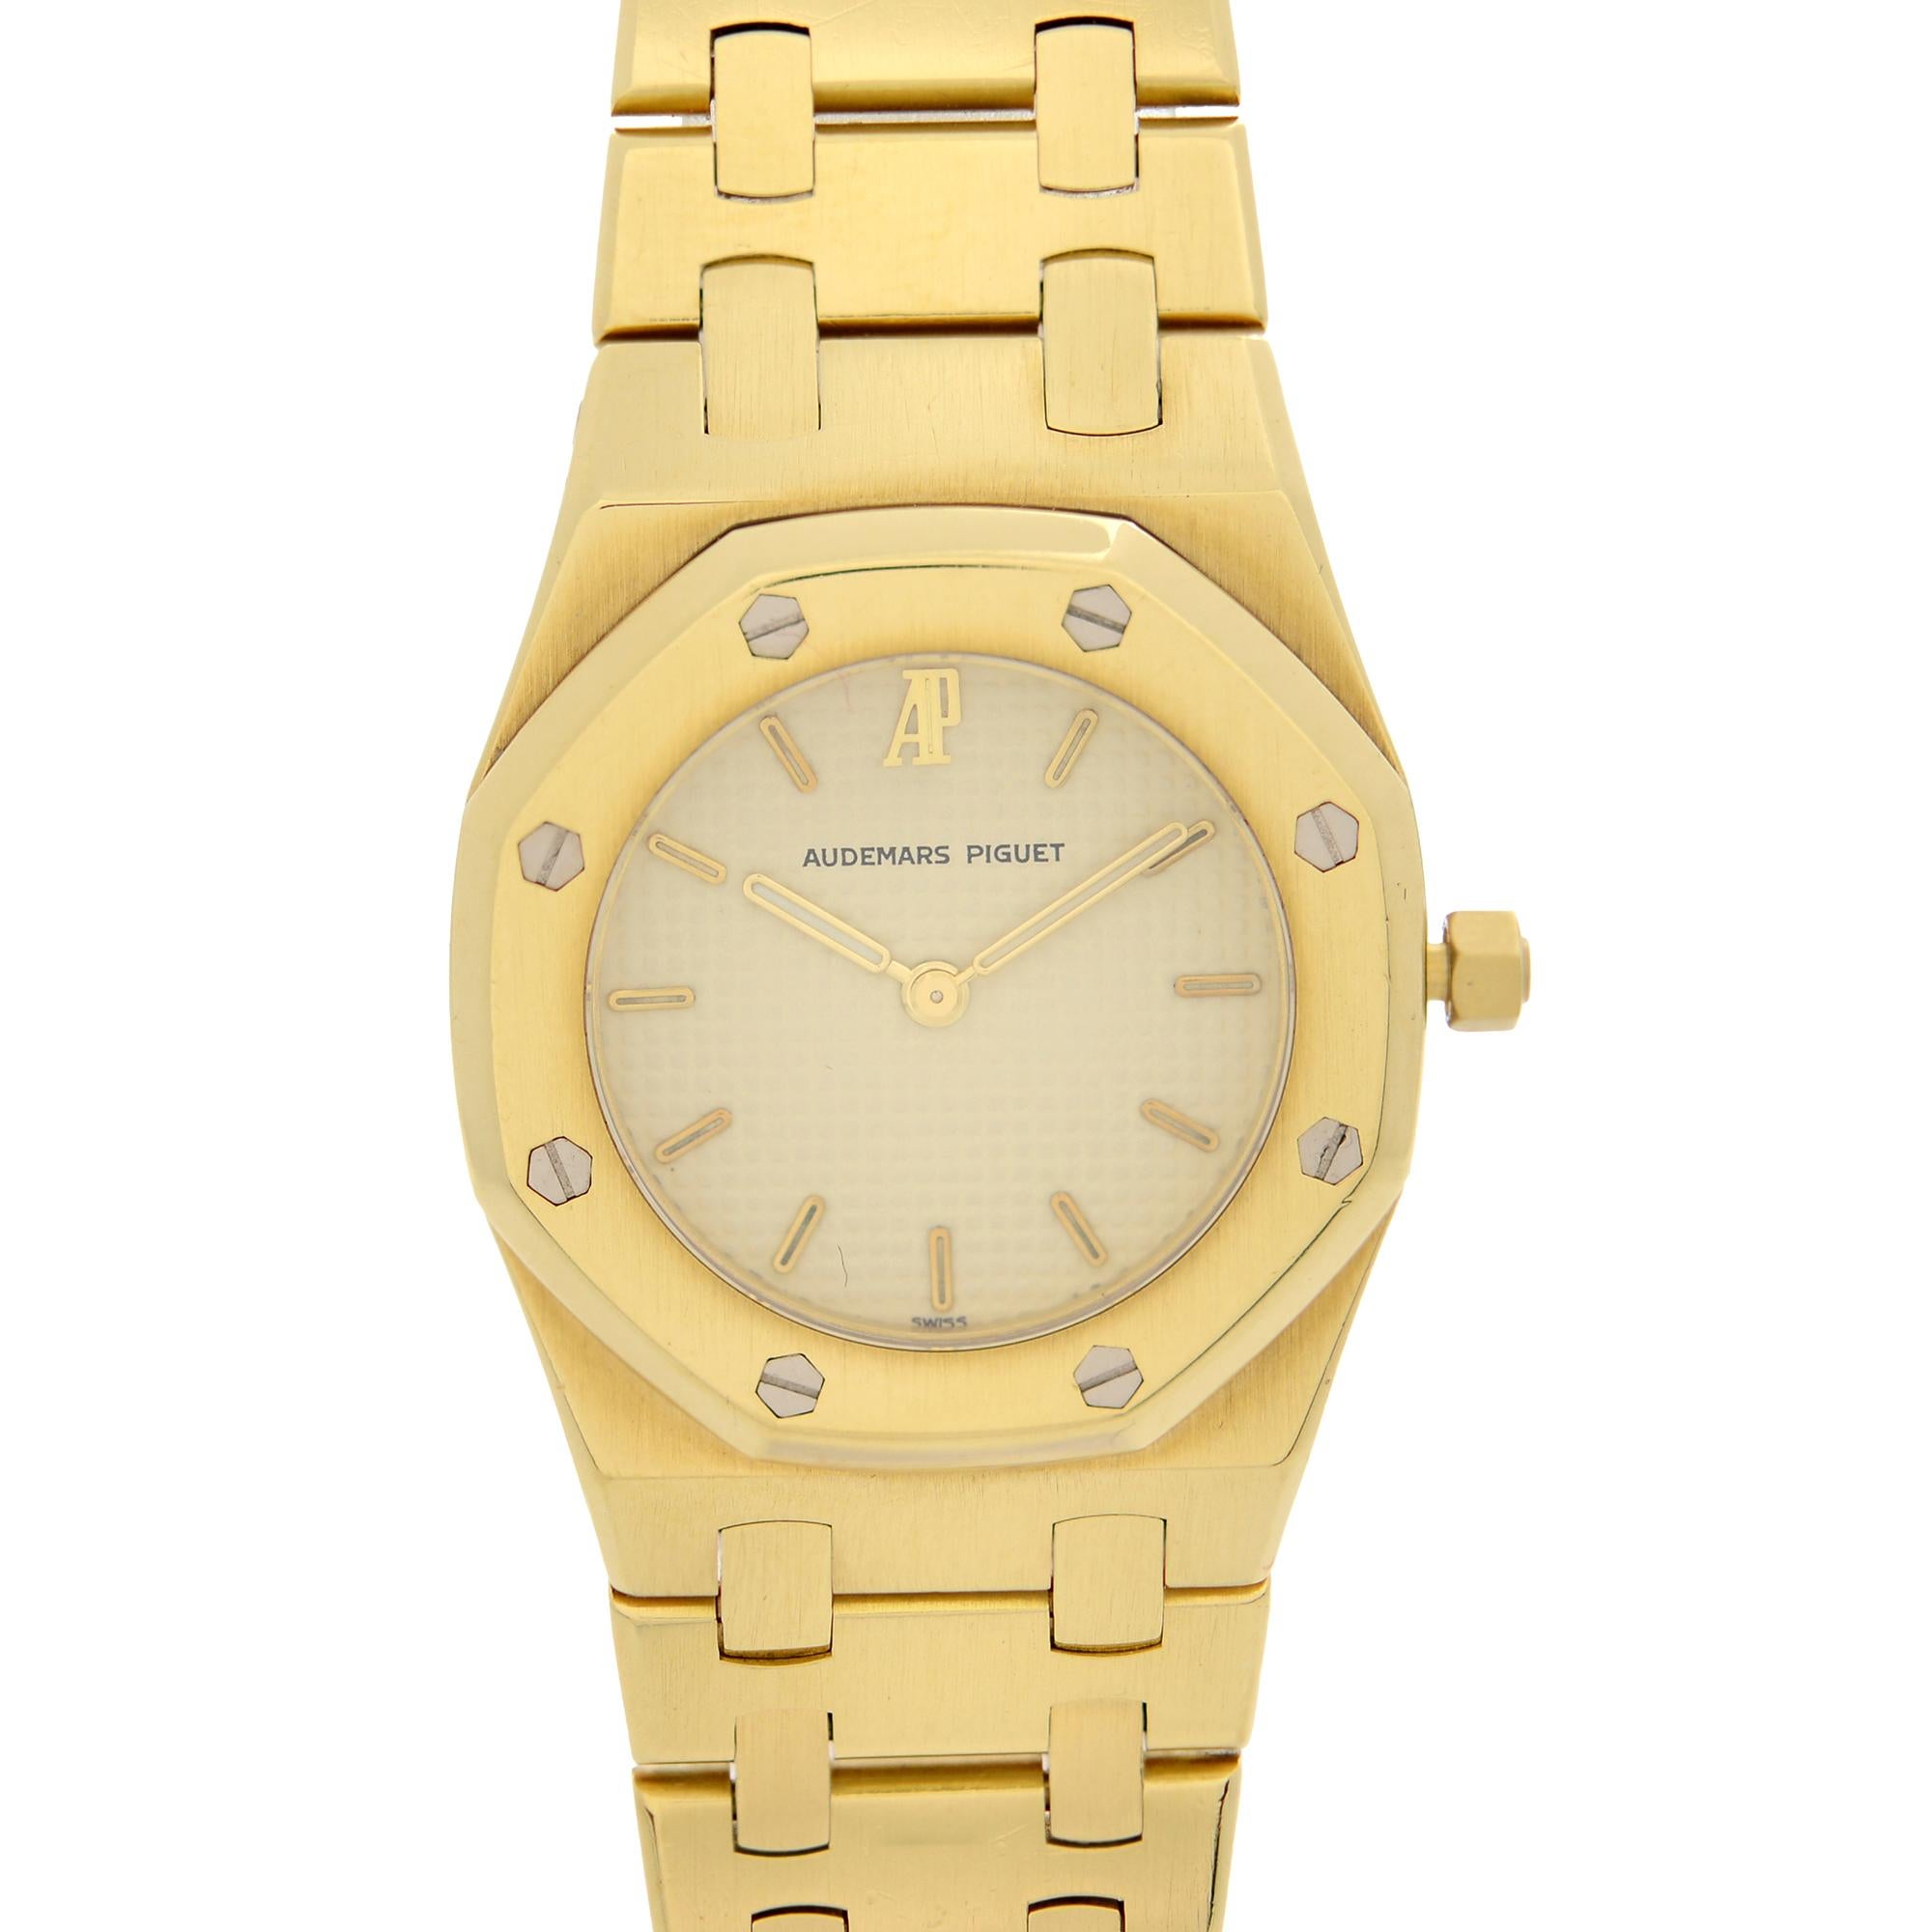 Pre-Owned Audemars Piguet Royal Oak 26 mm 18k Yellow Gold Cream Dial Ladies Quartz Watch 6007BA. The Was Produced in 1985. This Beautiful Timepiece is Powered by a Quartz Movement and Features: a Brushed 18k Yellow Gold Octagonal Case and Bracelet.